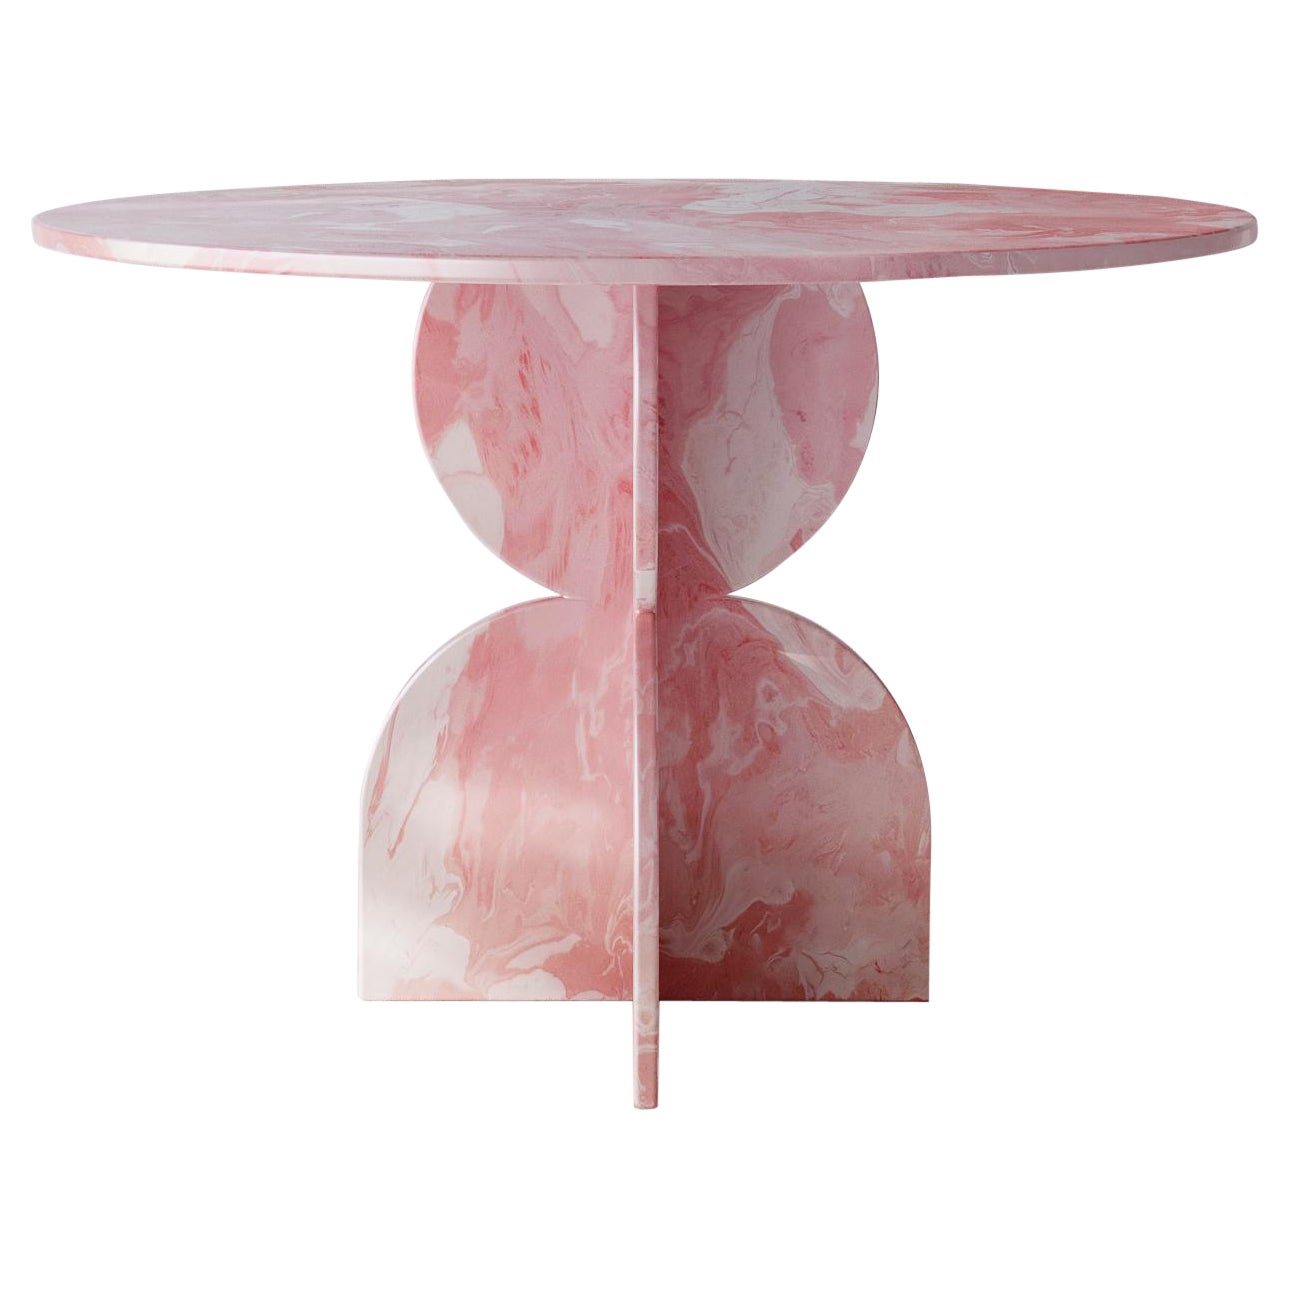 Contemporary Pink Round Table Hand-Crafted 100% Recycled Plastic by Anqa Studios